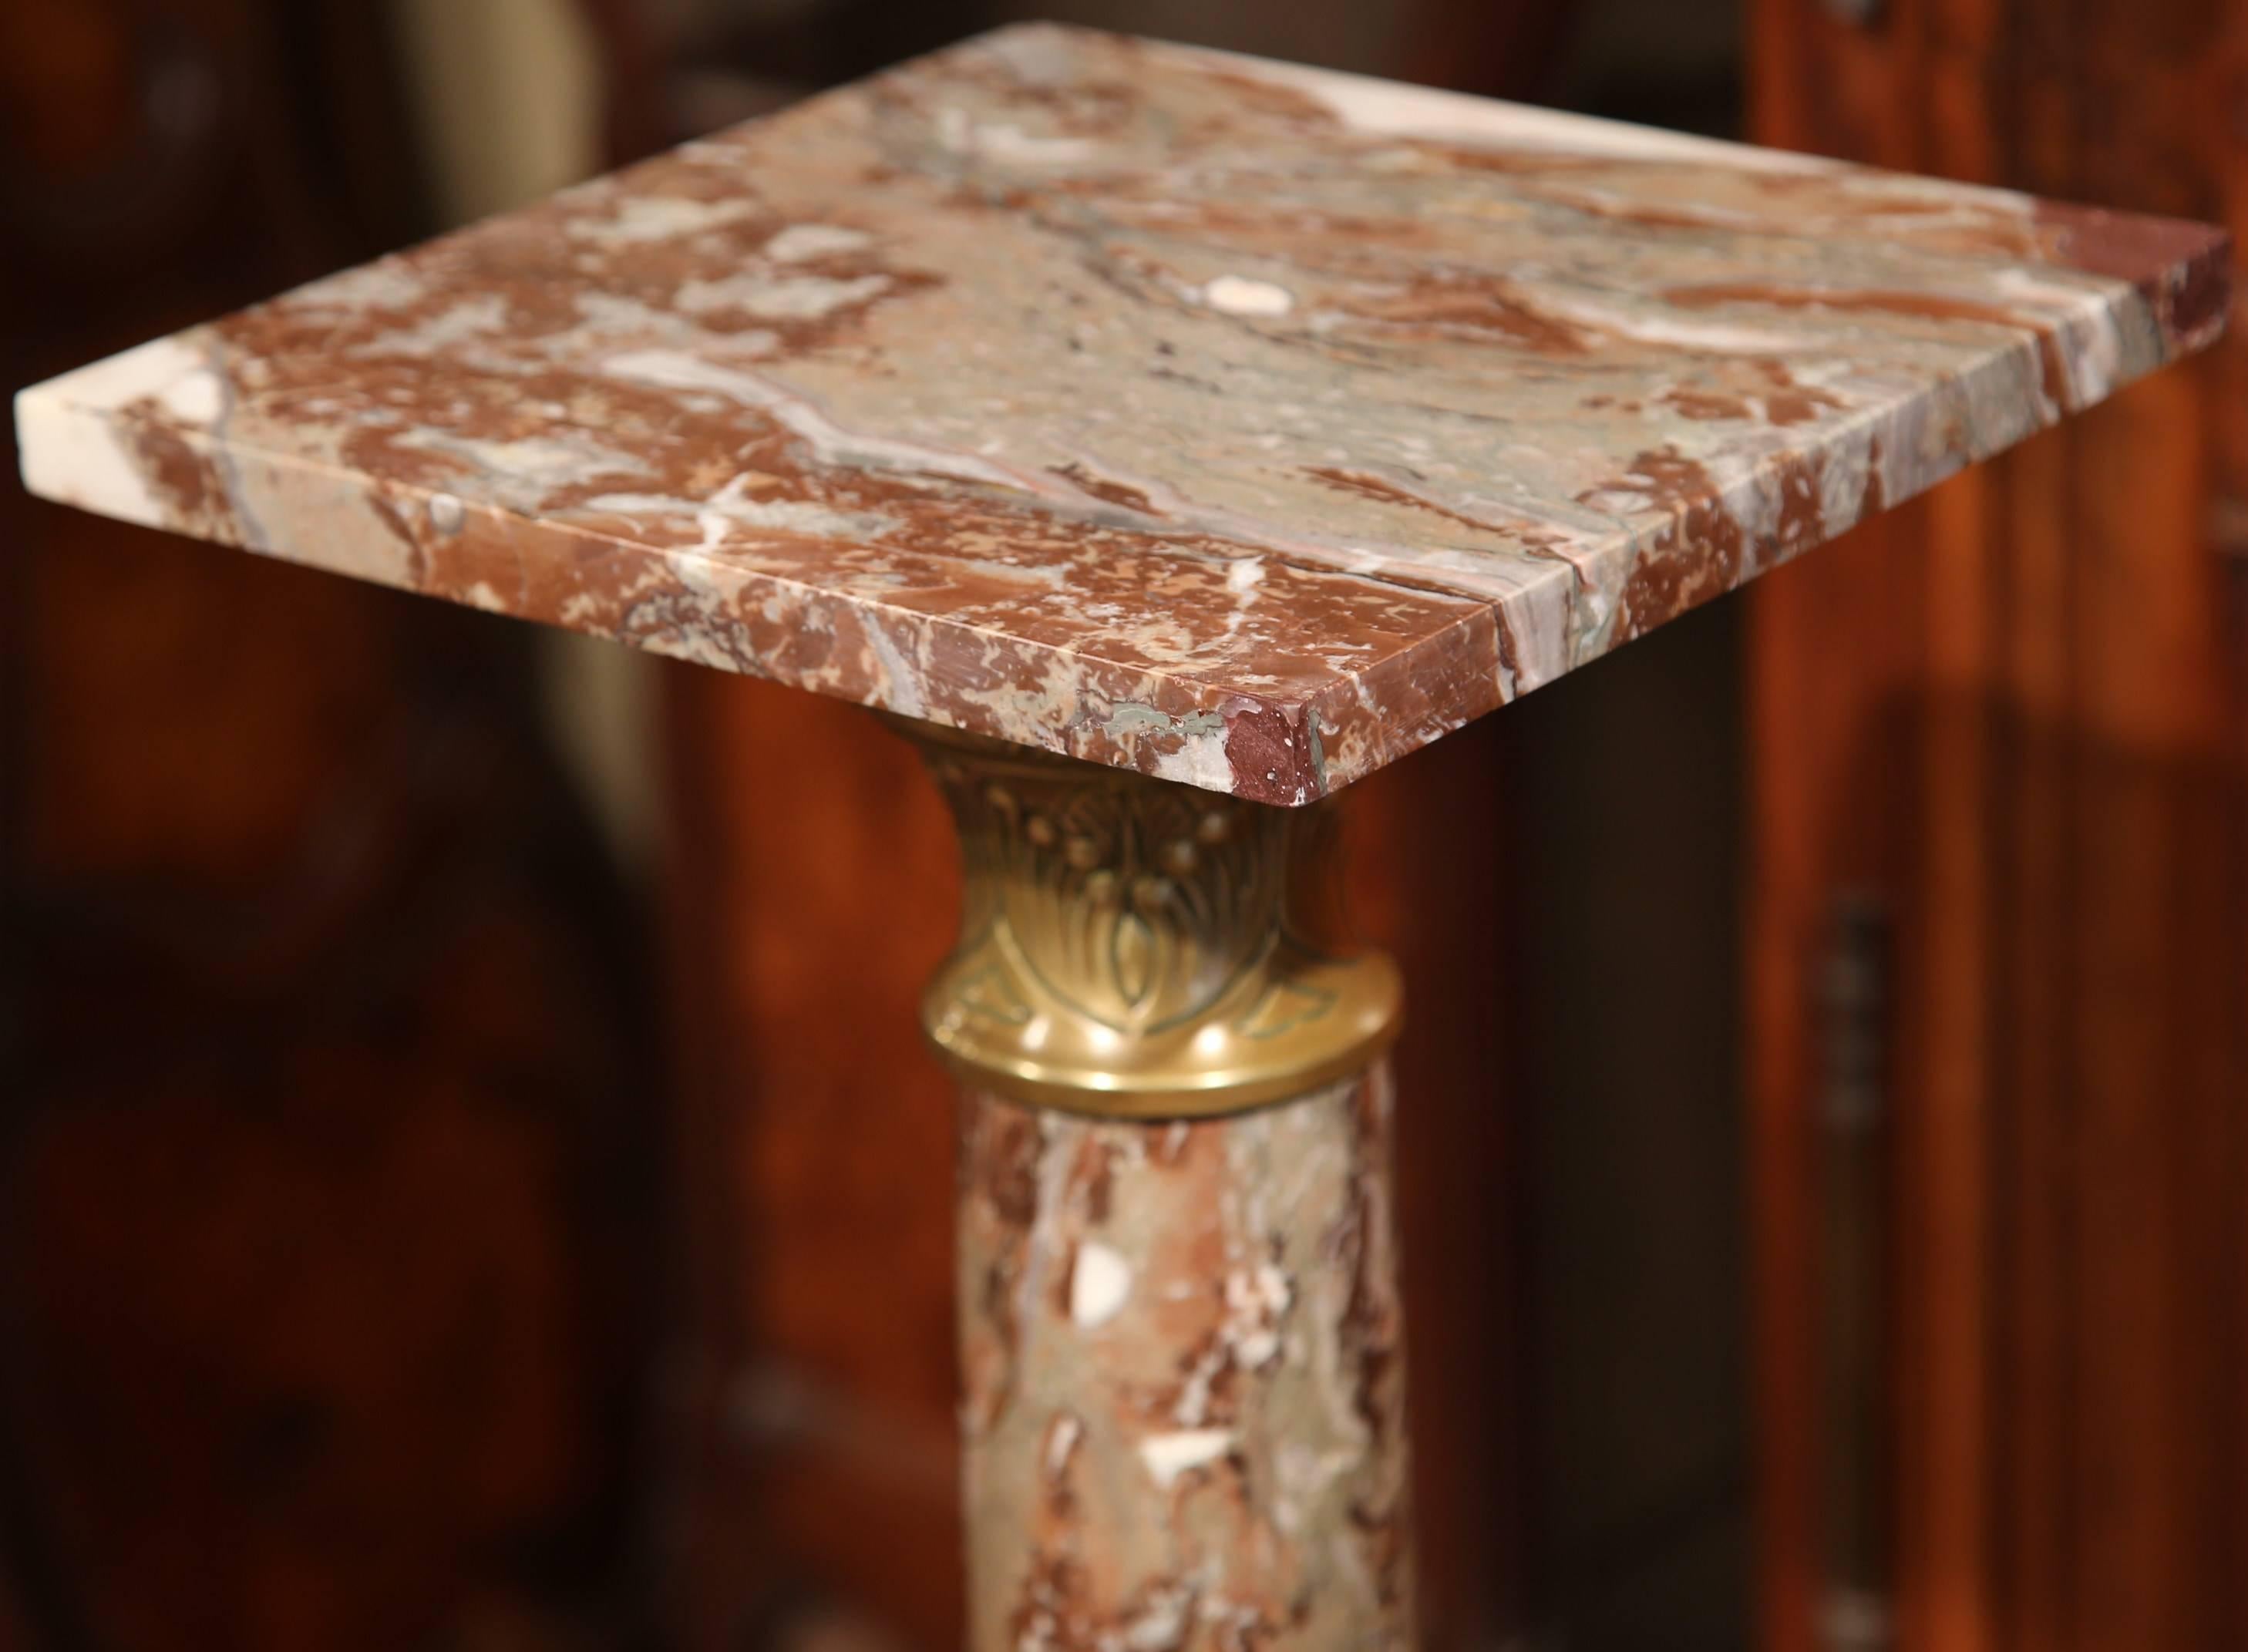 This elegant, antique pedestal was carved in France, circa 1860. The pedestal is made from a white veined, red marble and features brass repousse accents at the base and under the removable top. This piece is the perfect size to hold a bronze or